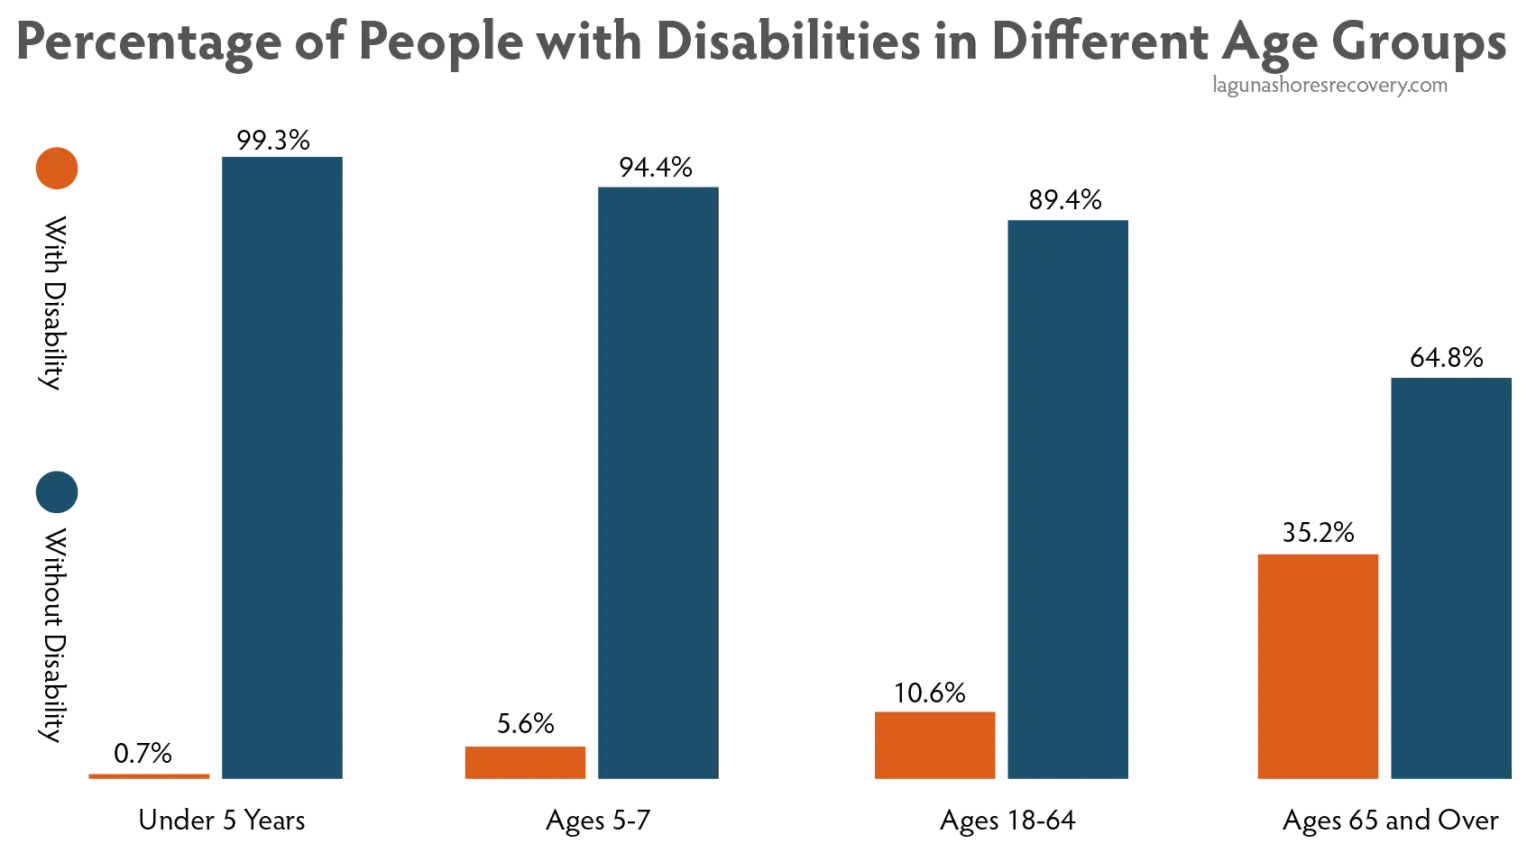 Percentage-of-People-with-Disabilites-in-Different-Age-Groups-05-1536x853.png